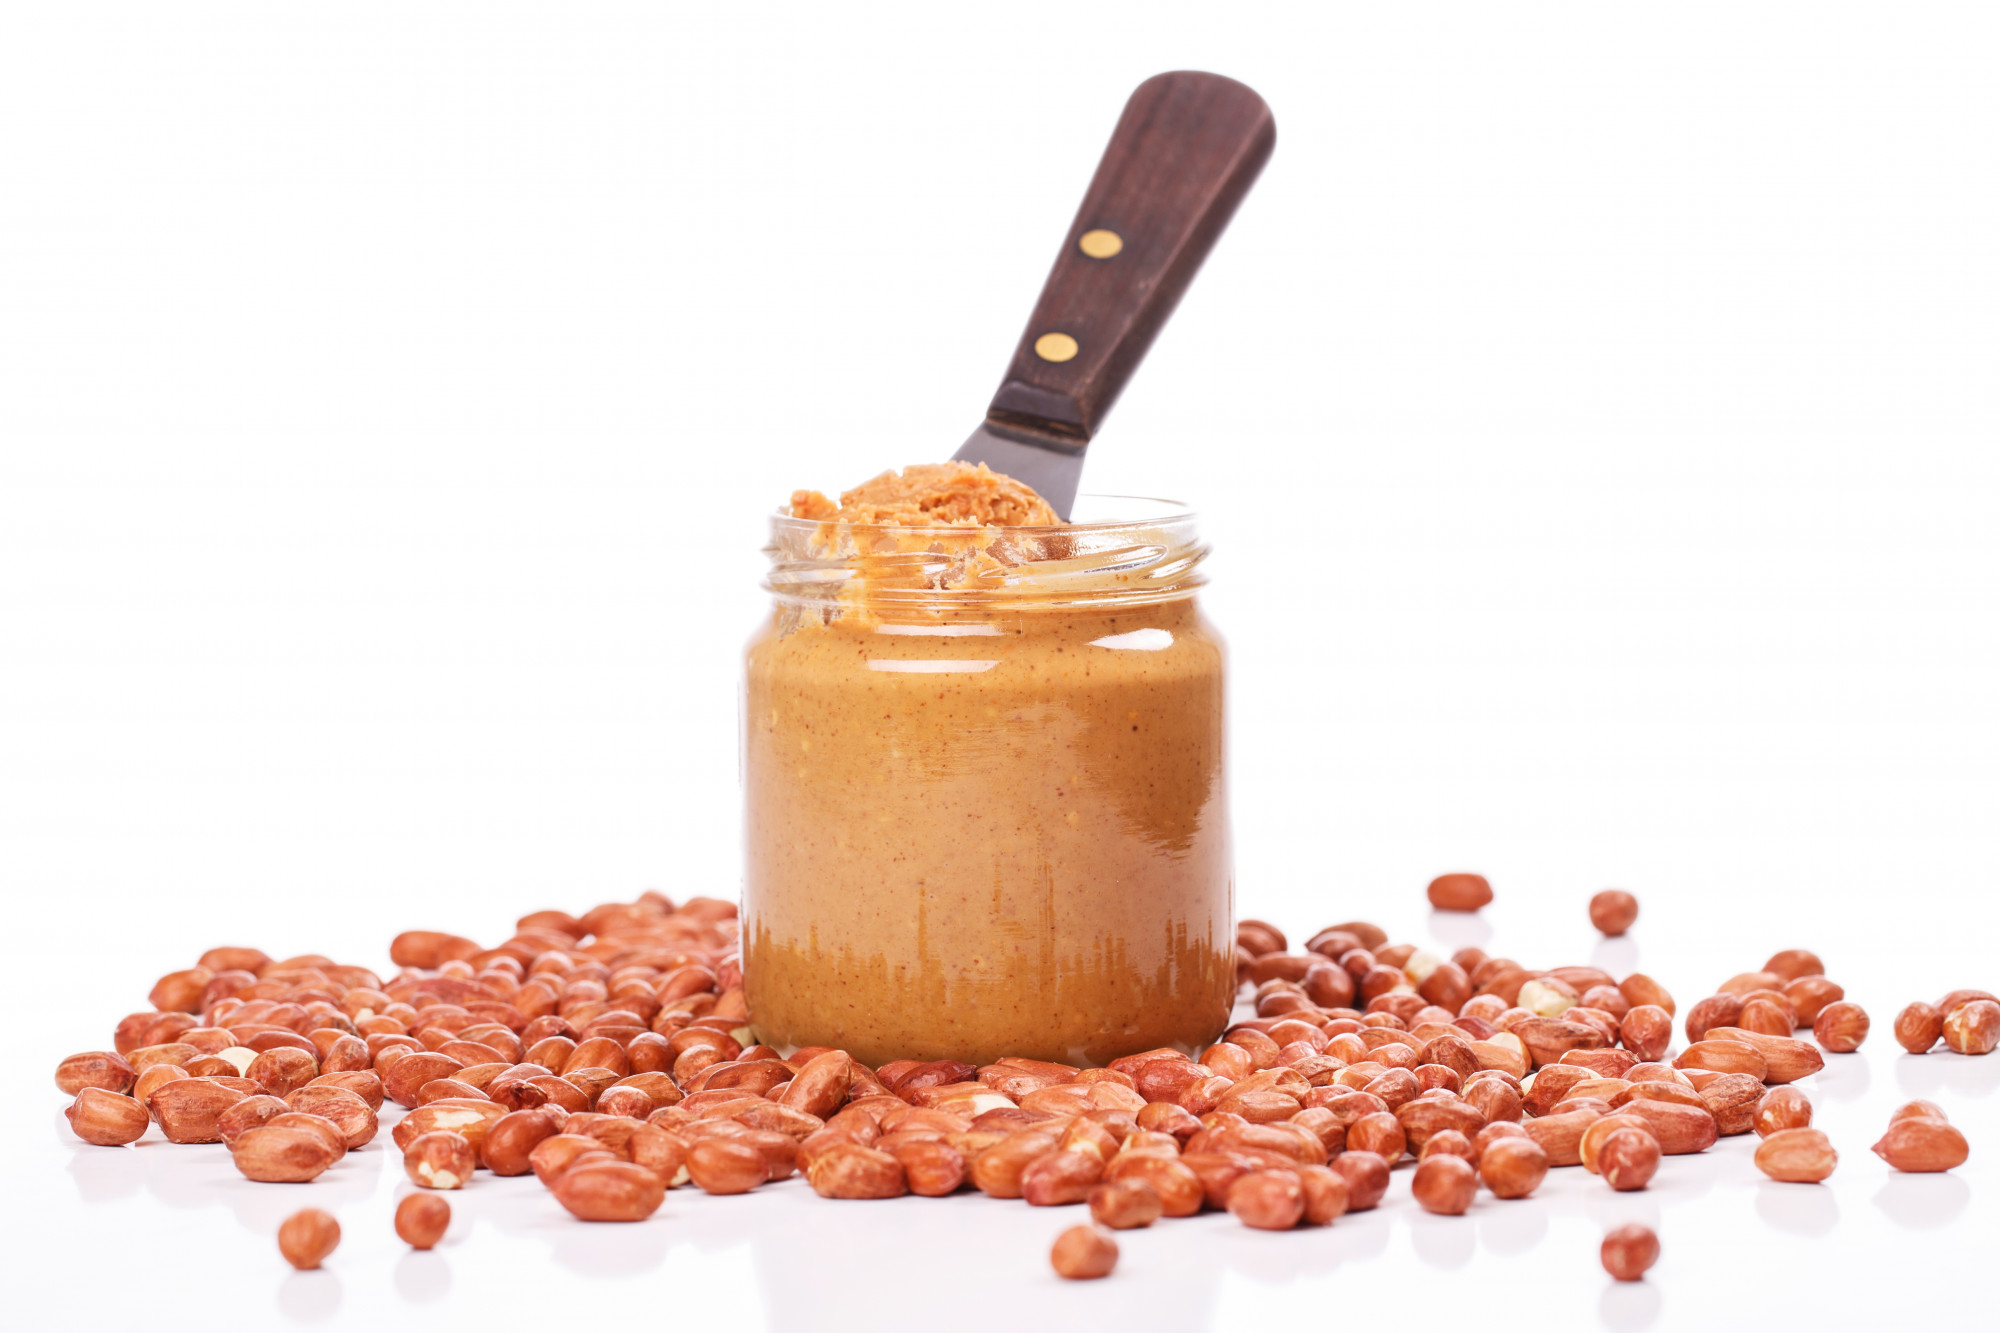 Is Peanut Butter Good or Bad for Your Health?